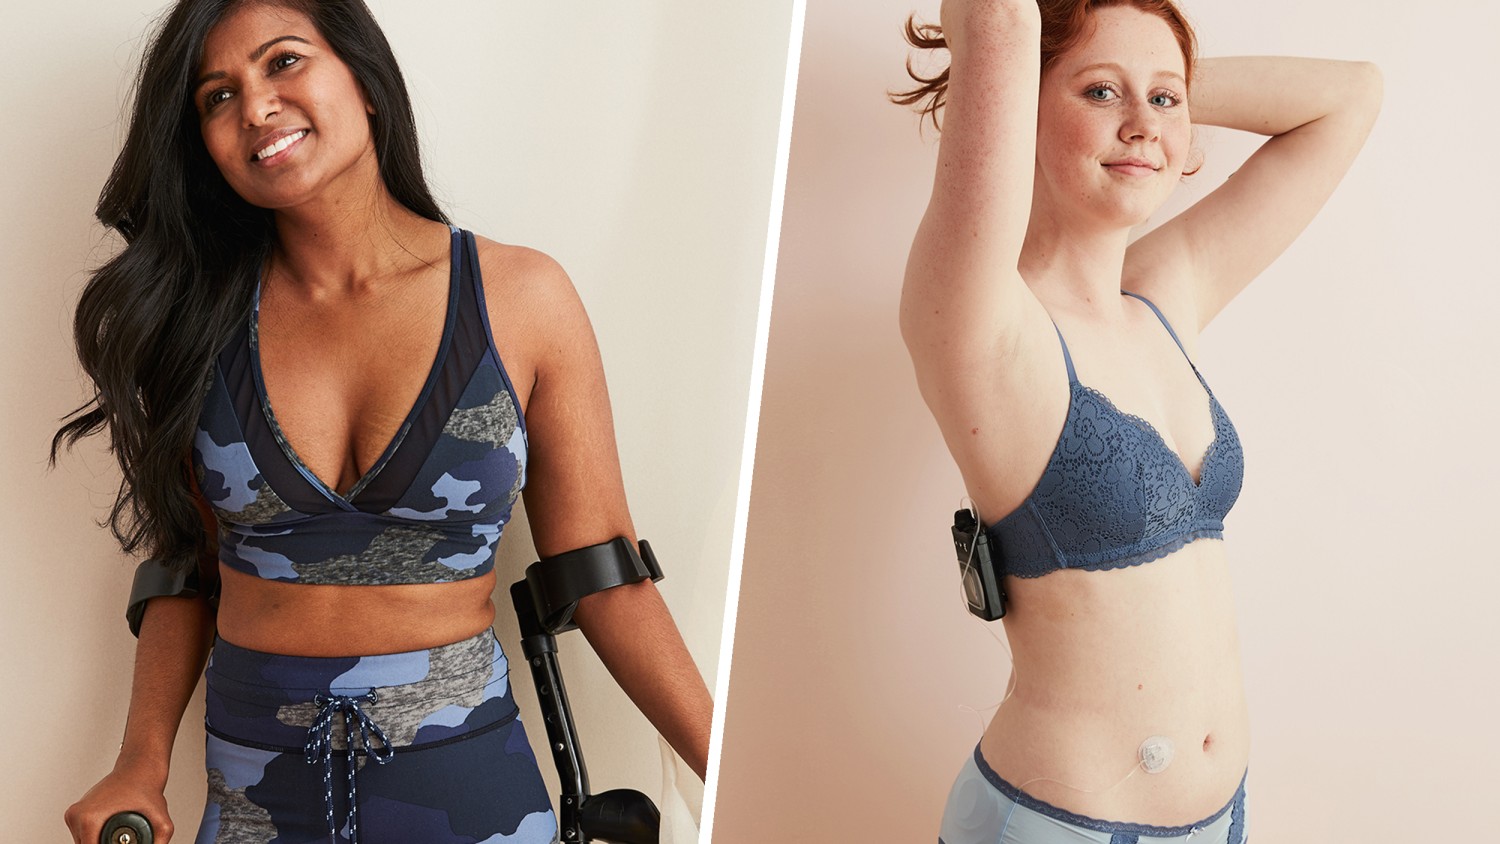 Aerie bra ads feature models with disabilities